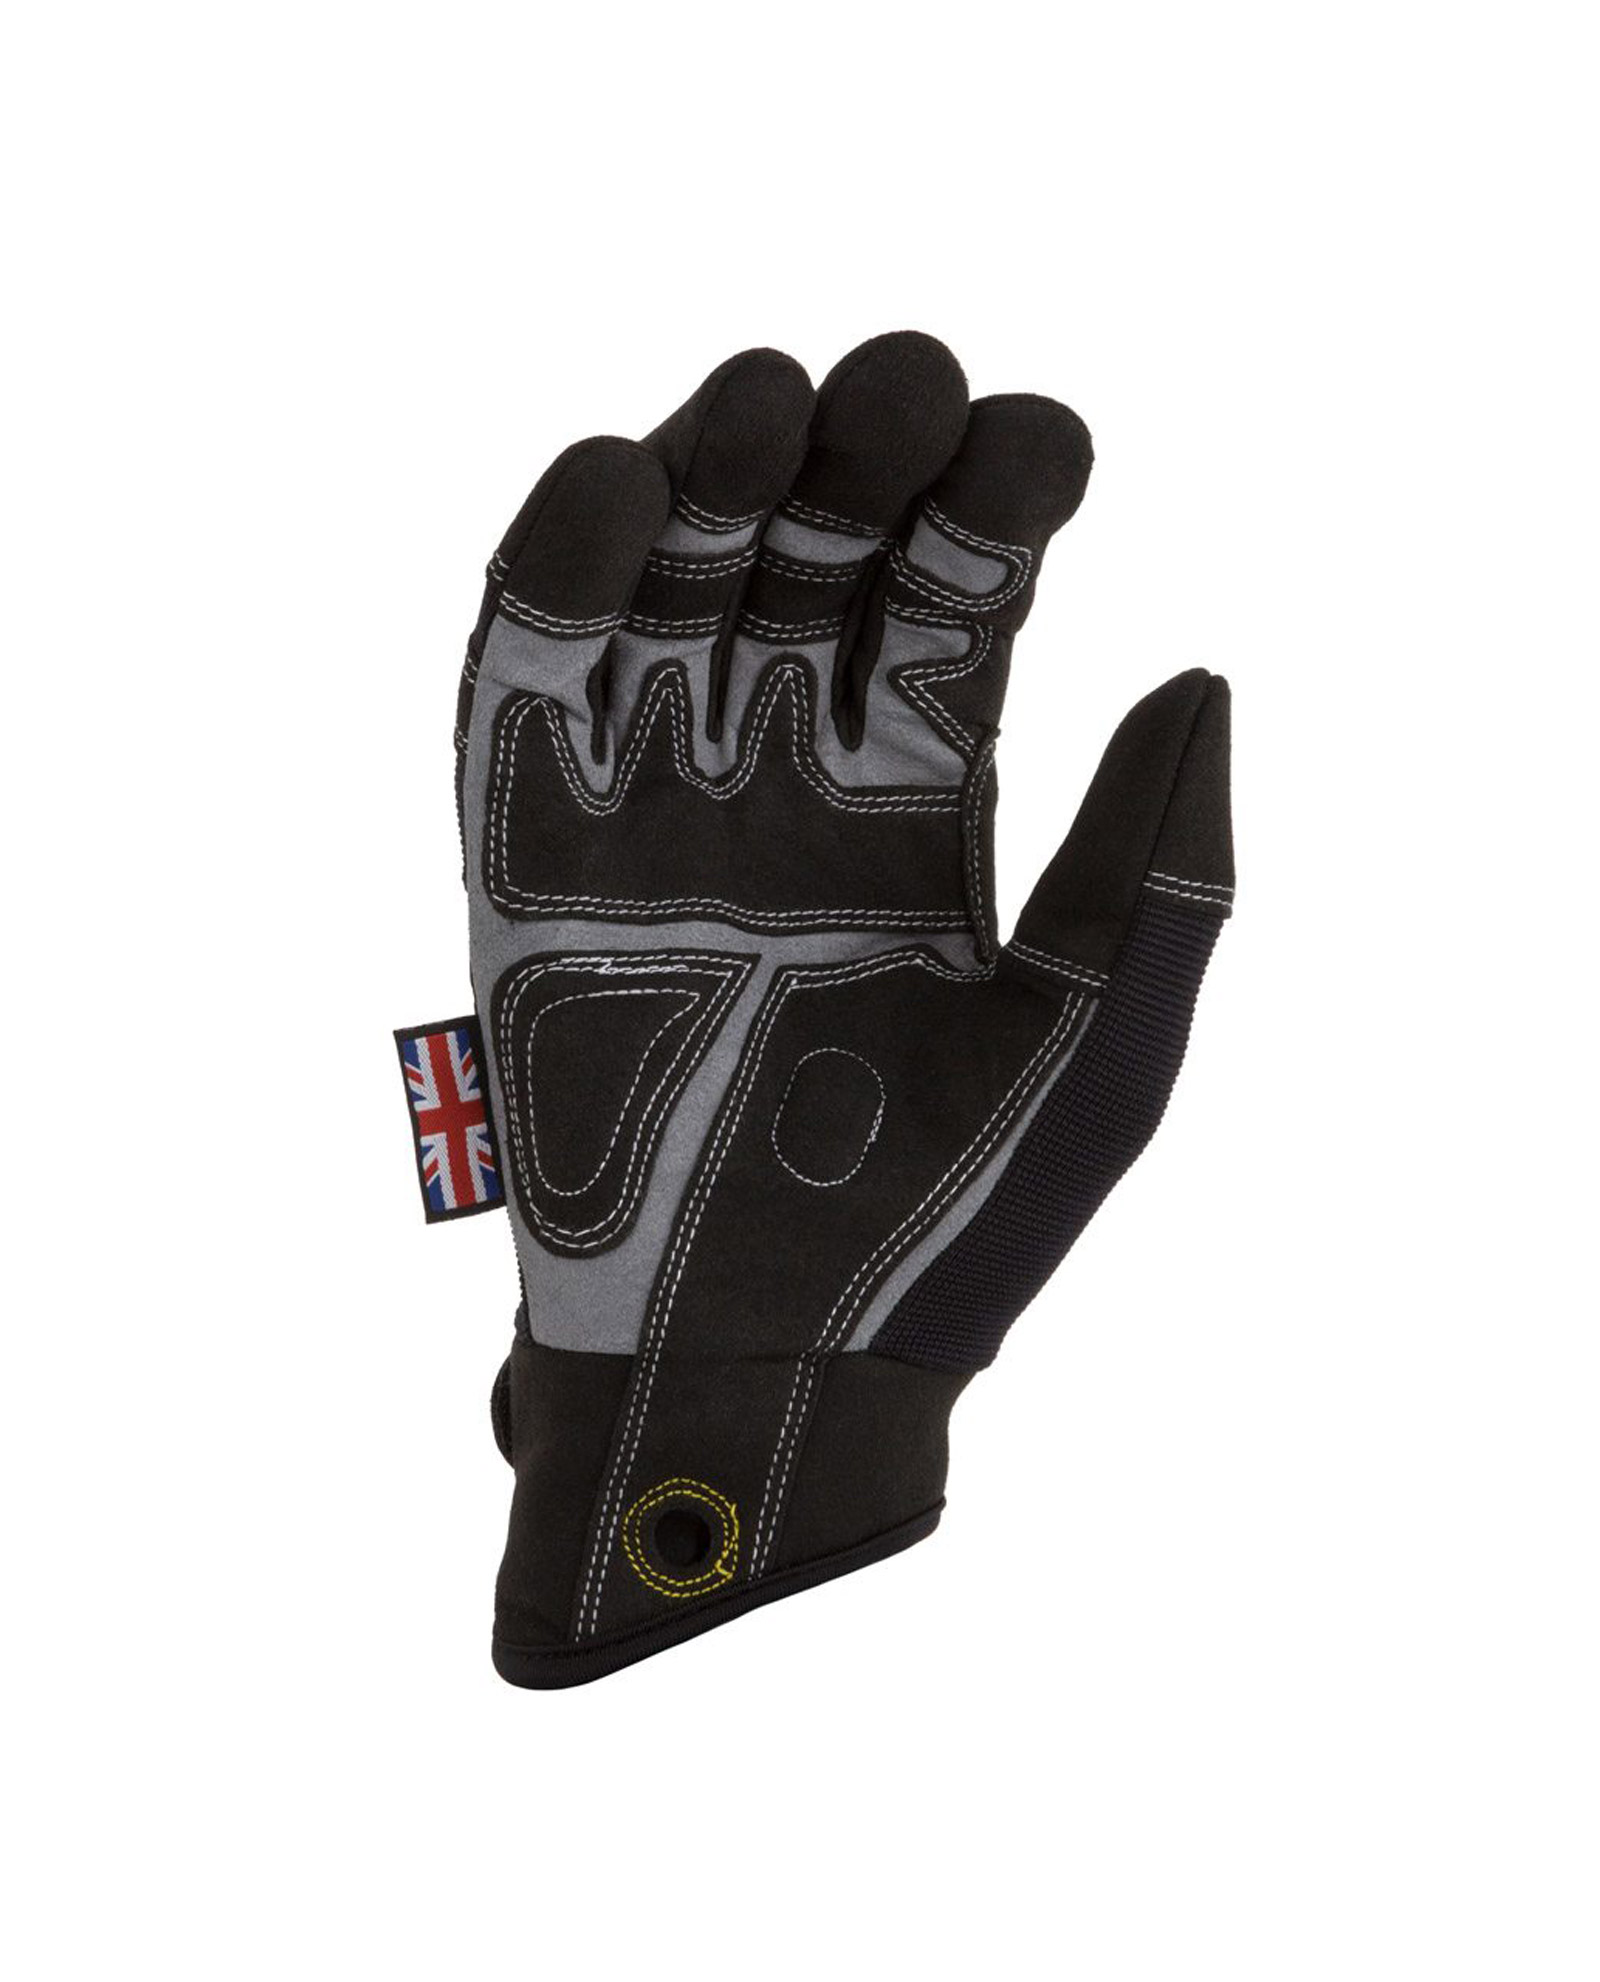 Dirty Rigger Dty Comforg Comfort Fit Rigger Glove 1